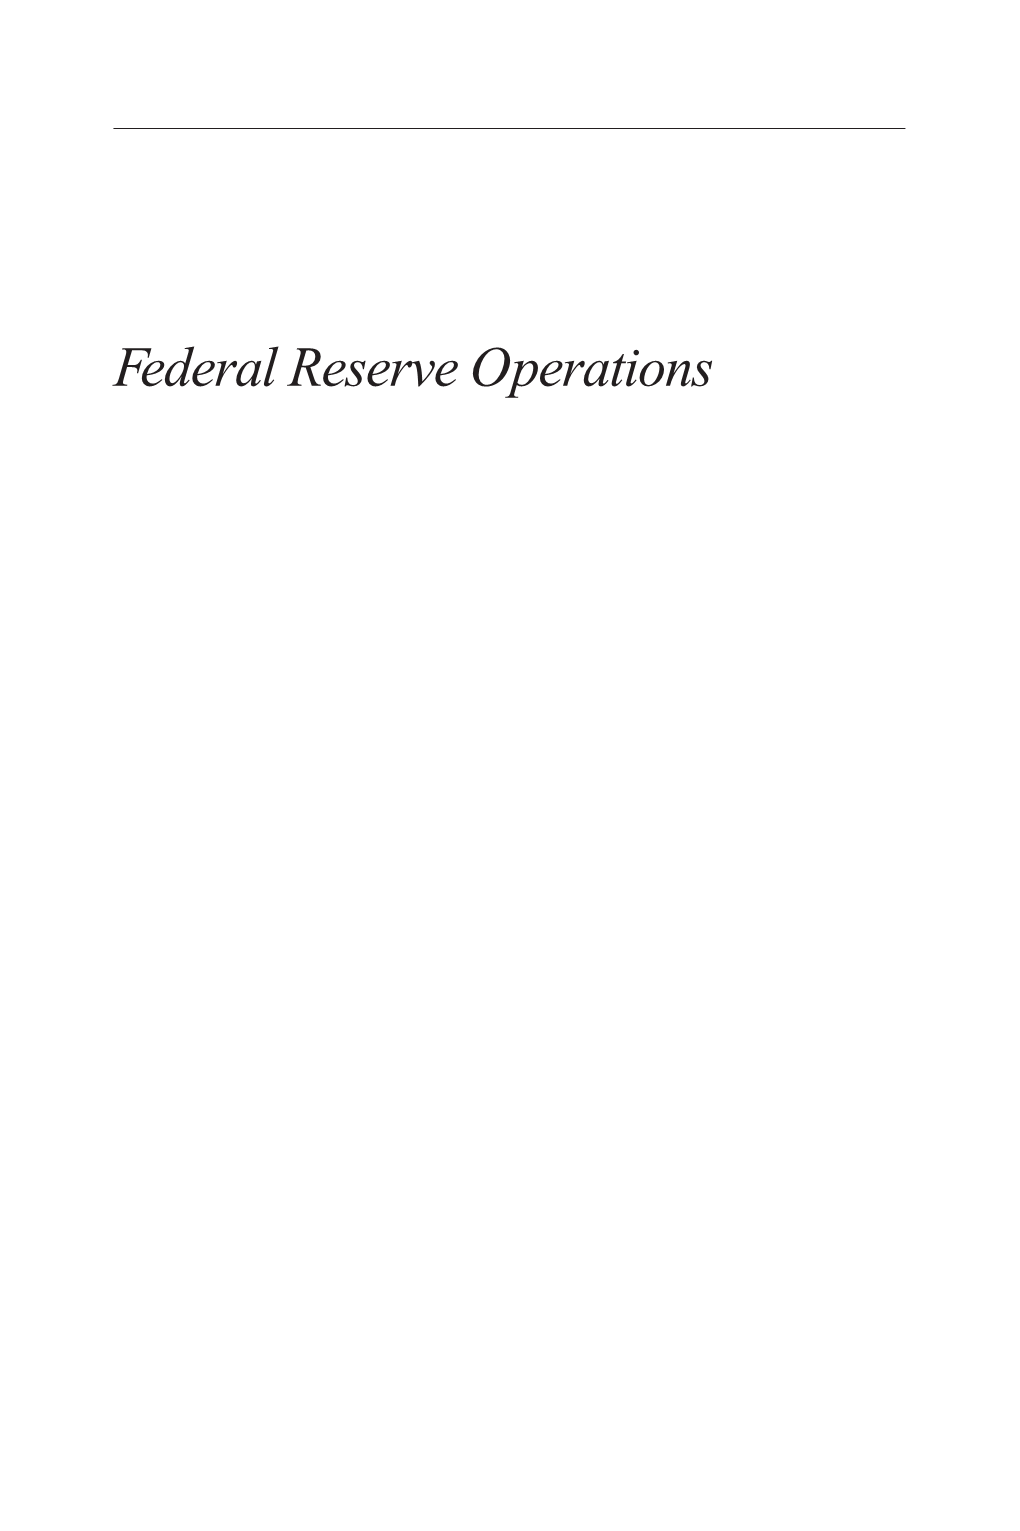 Federal Reserve Operations